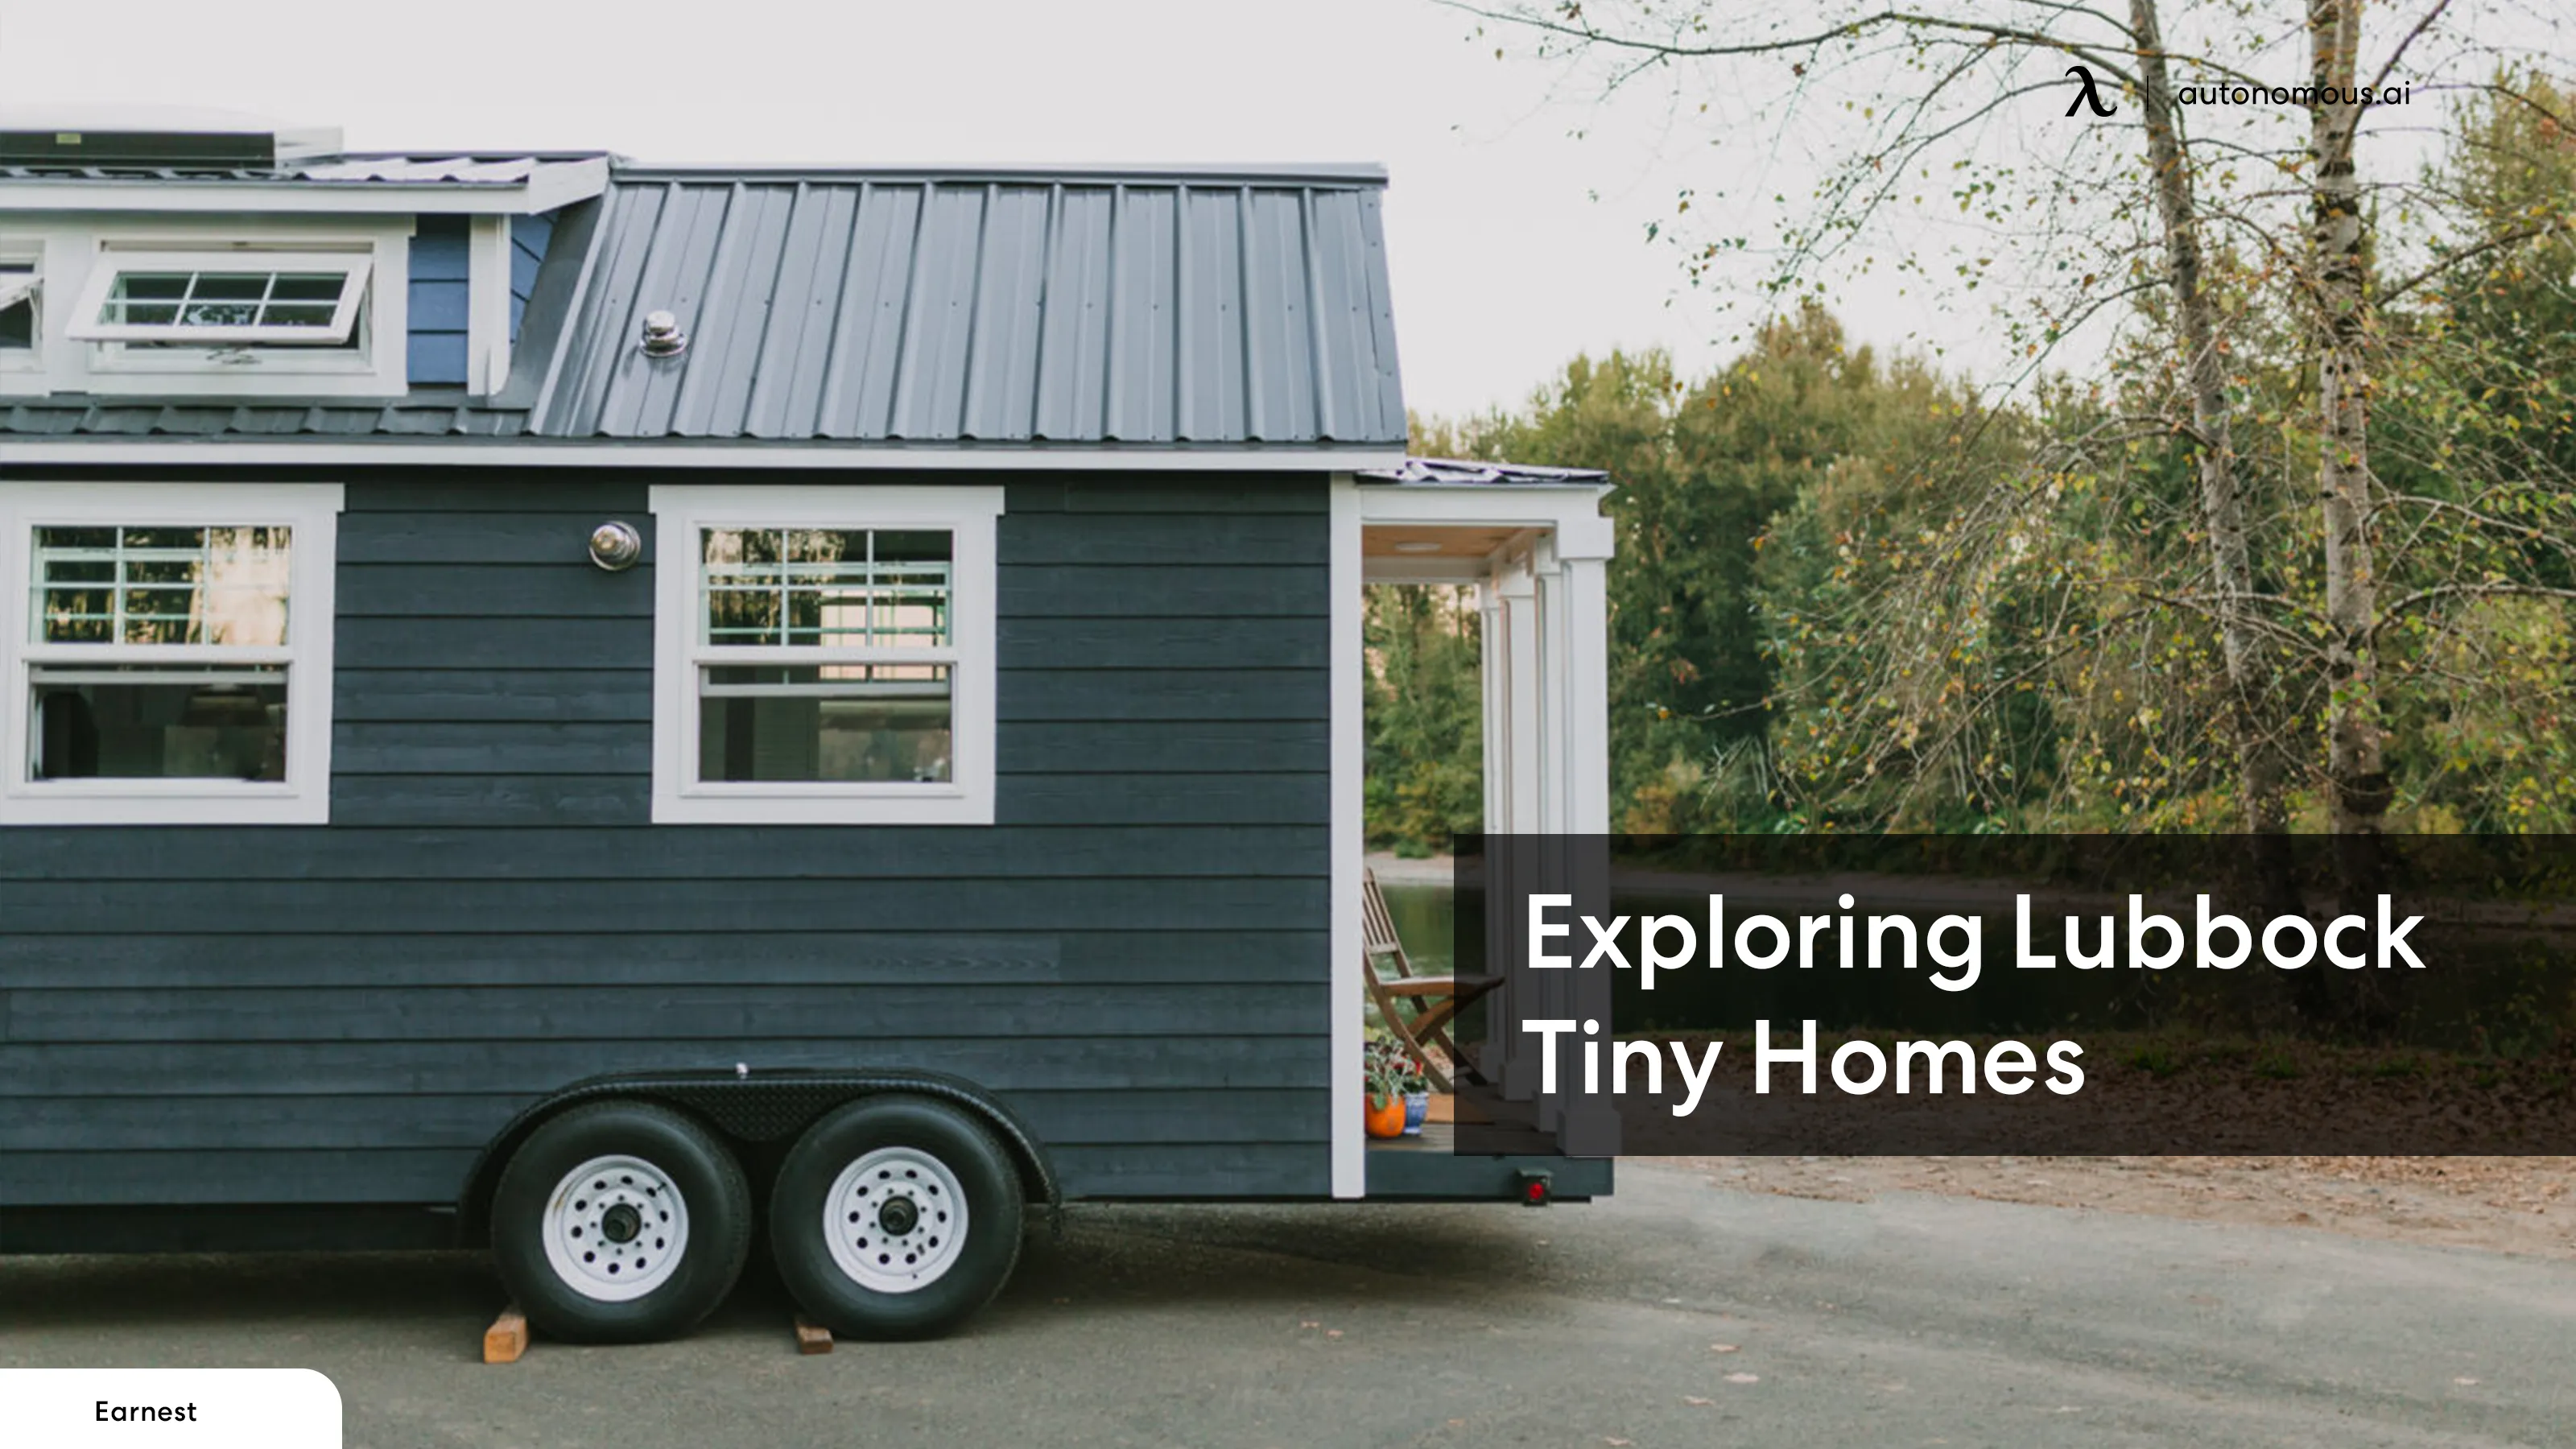 Lubbock Tiny Homes: Permits, Regulations, and Building Codes